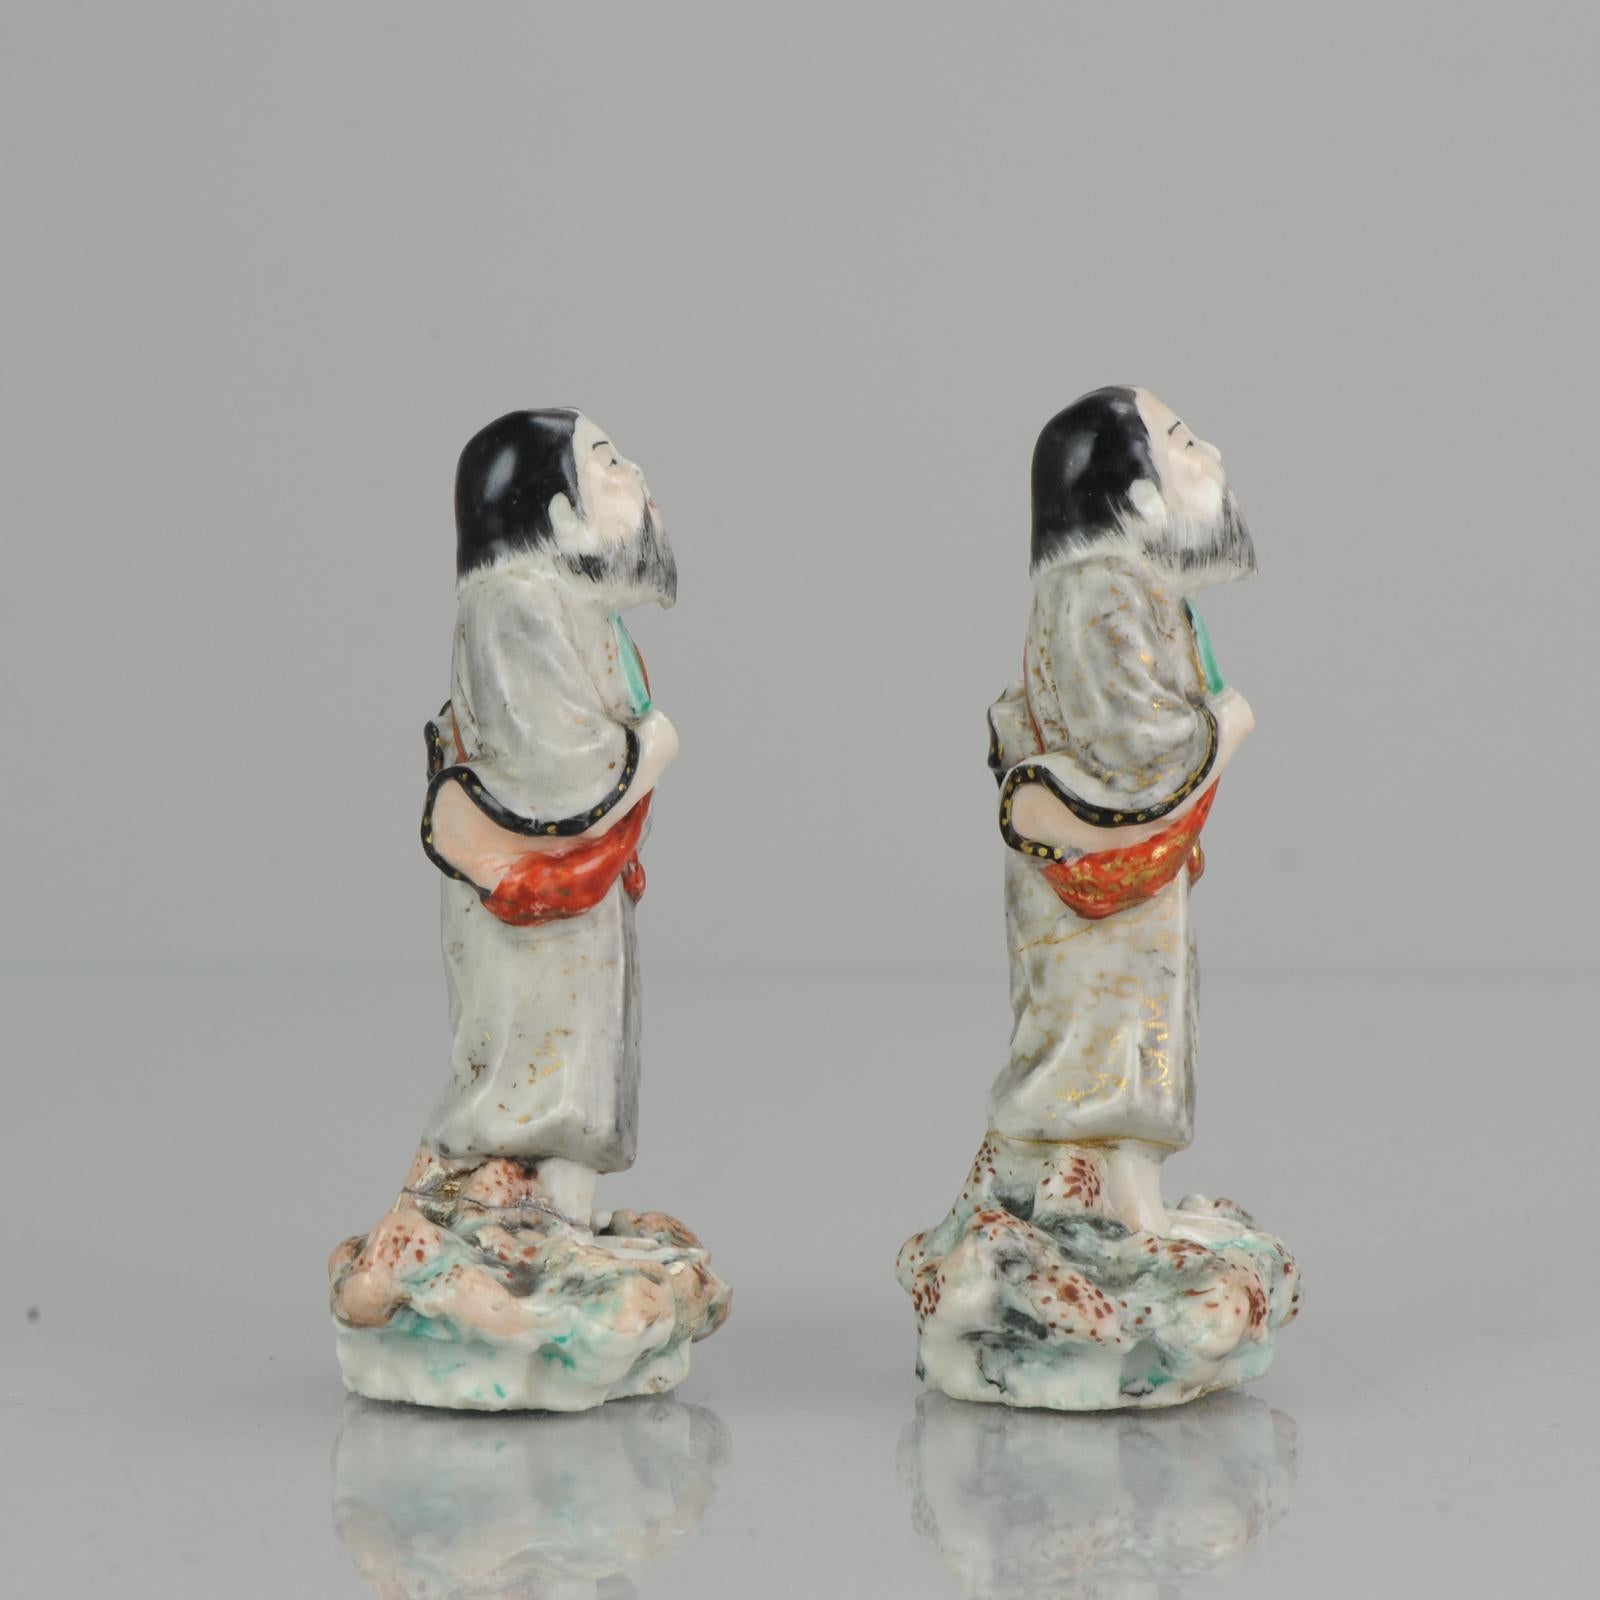 A very nice pair of small statues. Good for home decoration.
The mark reads:
?? Kutani
?? Taniguchi (the maker name).

Condition
hands missing, part of beard missing. Lower parts restuck. Size approx. 95mm high
Period
19th century
ca 1900.